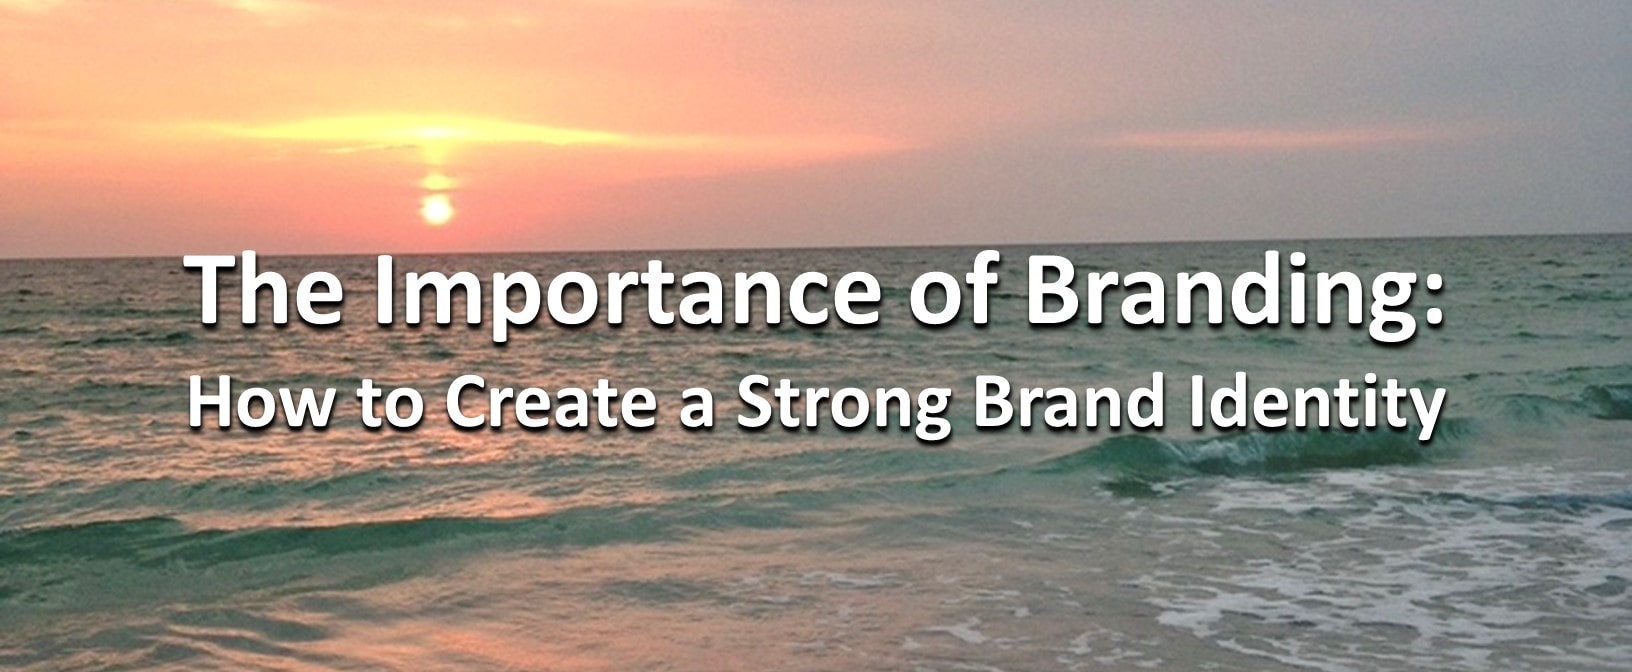 The Importance of Branding: How to Create a Strong Brand Identity